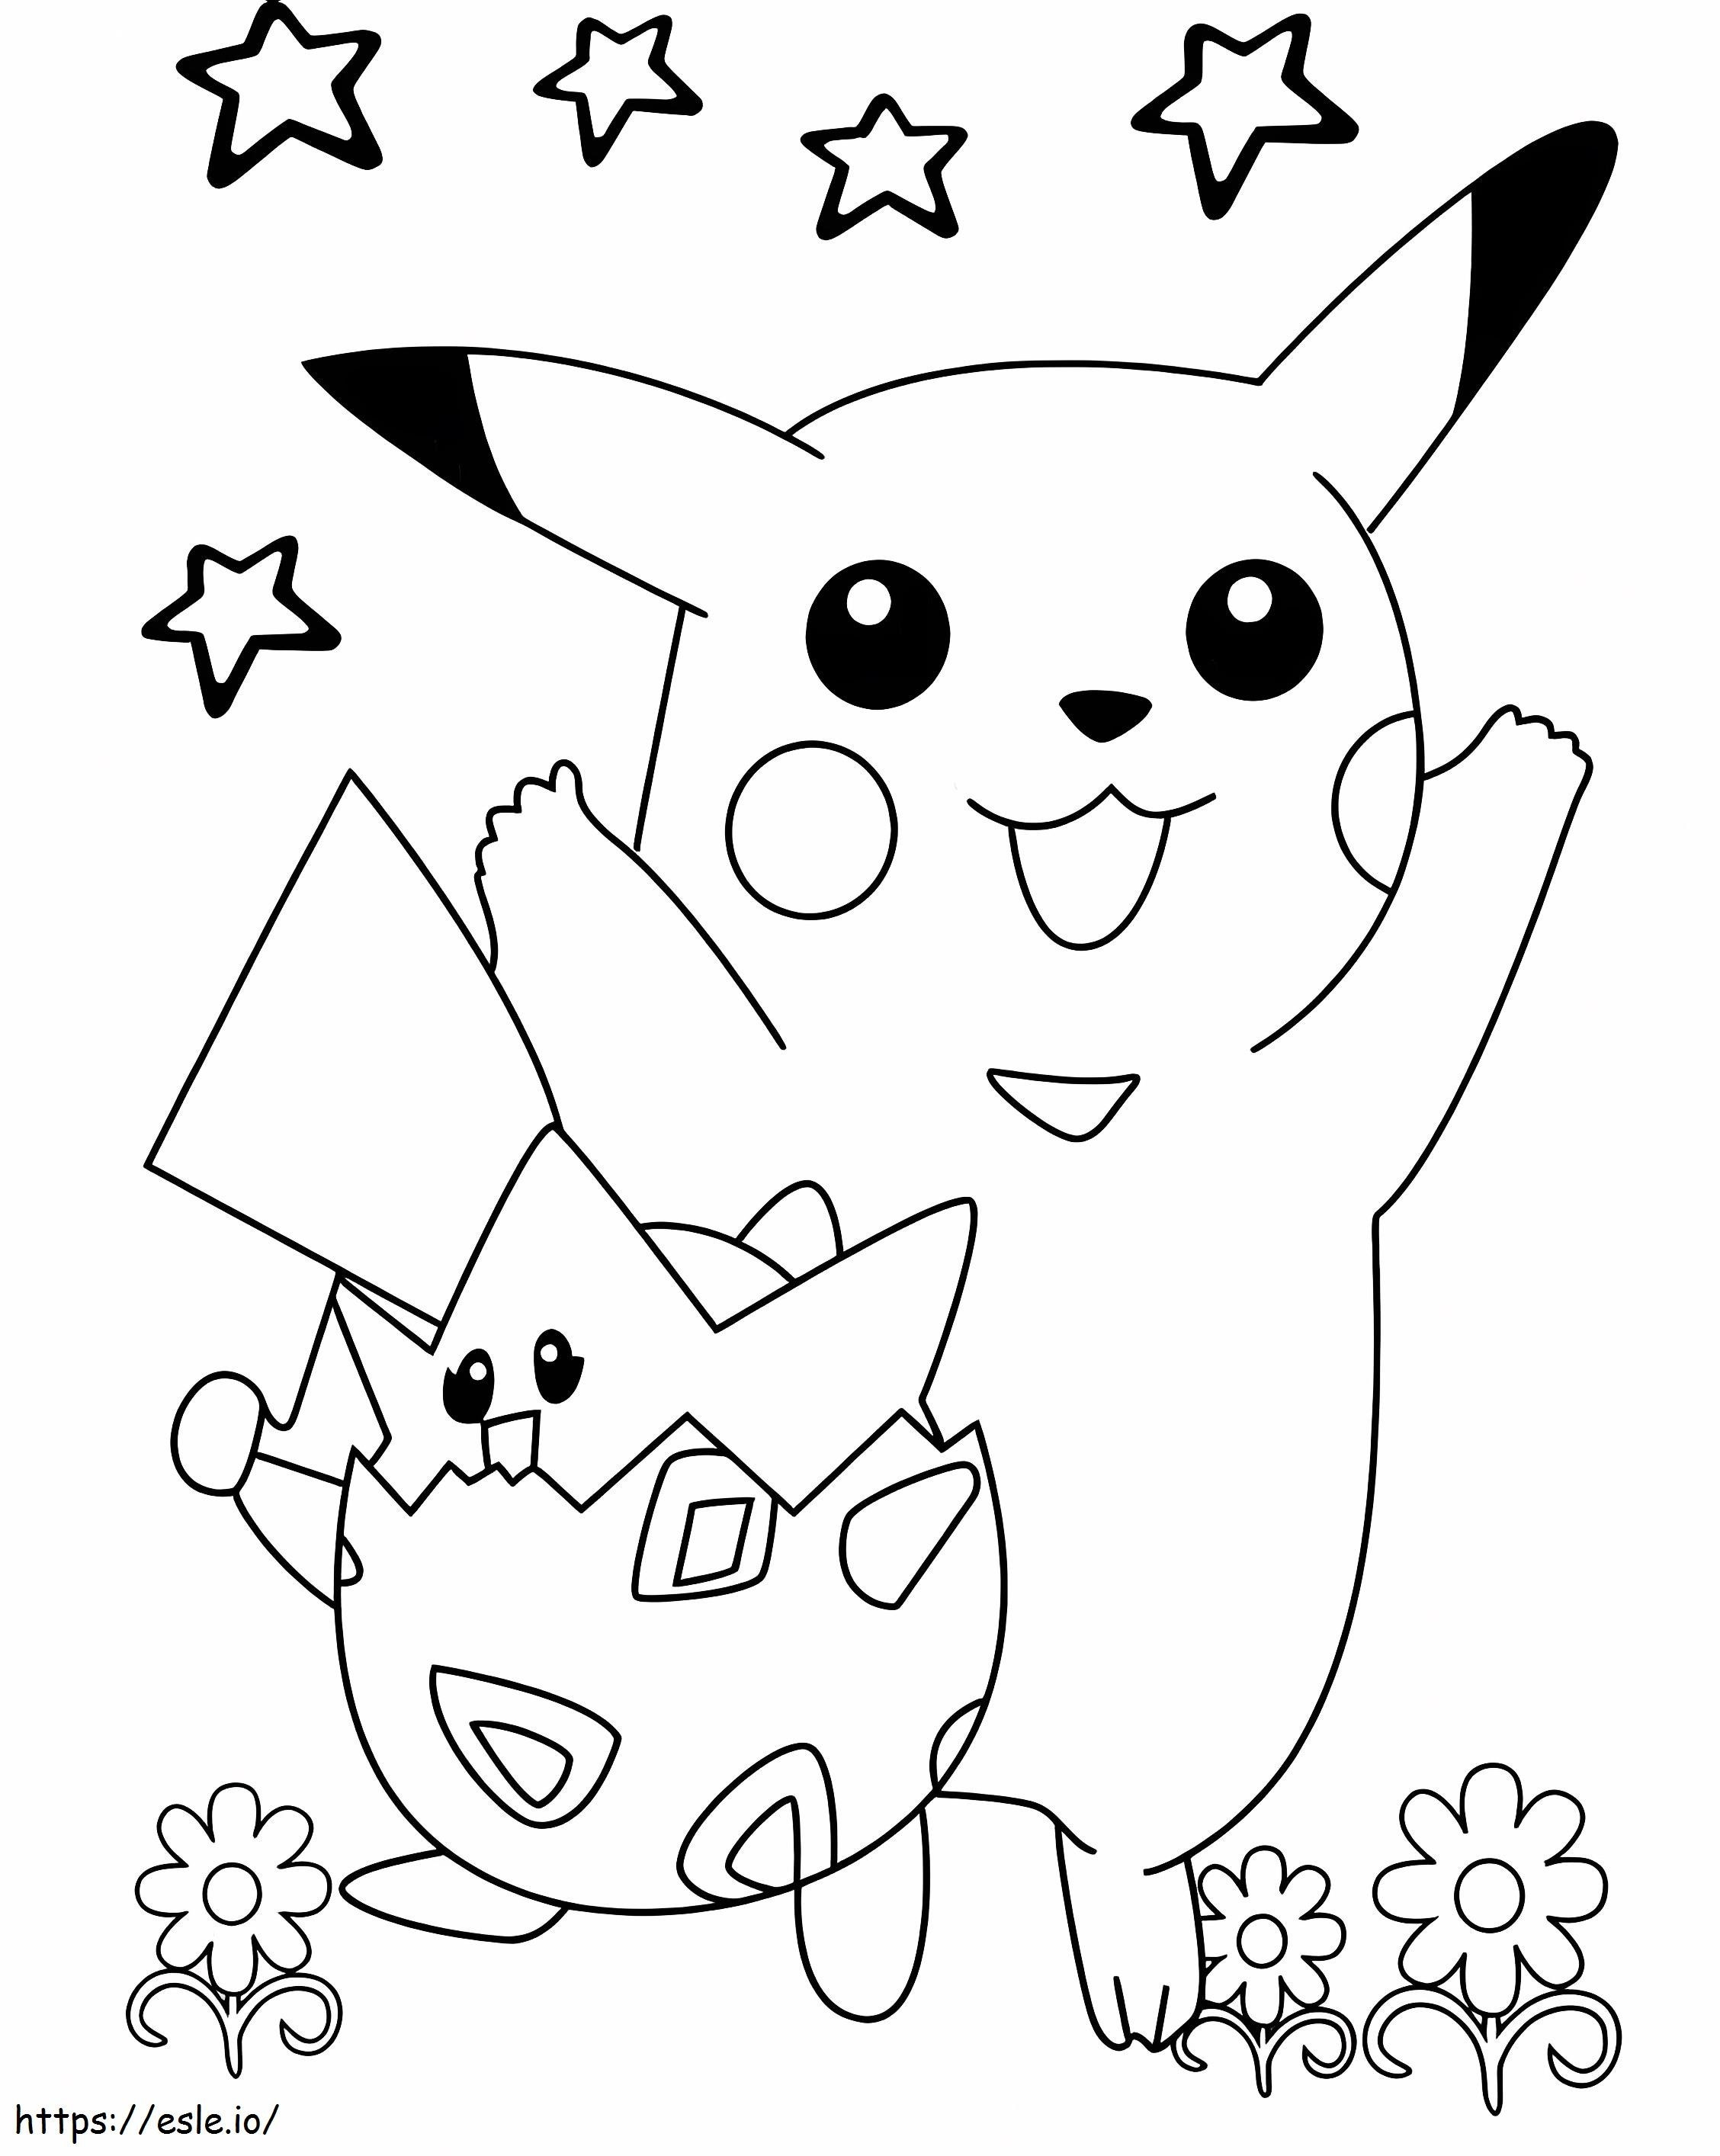 Togepi And Pikachu coloring page